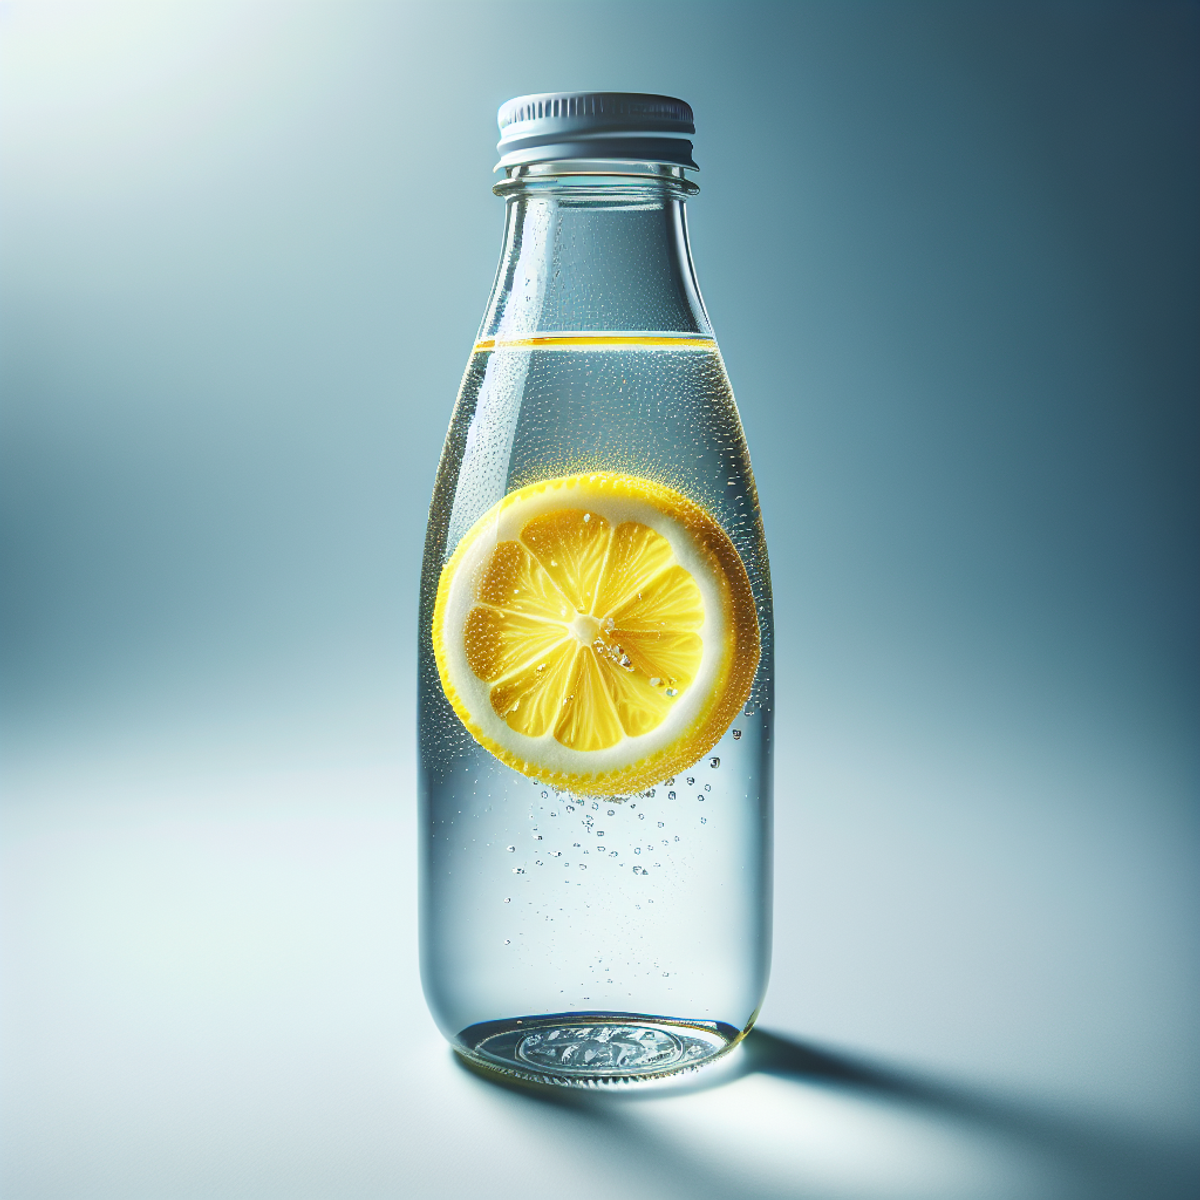 A close-up image of a clear glass water bottle filled with water and a slice of lemon floating in it, reflecting light to convey a sense of hydration and health with an eco-friendly message.